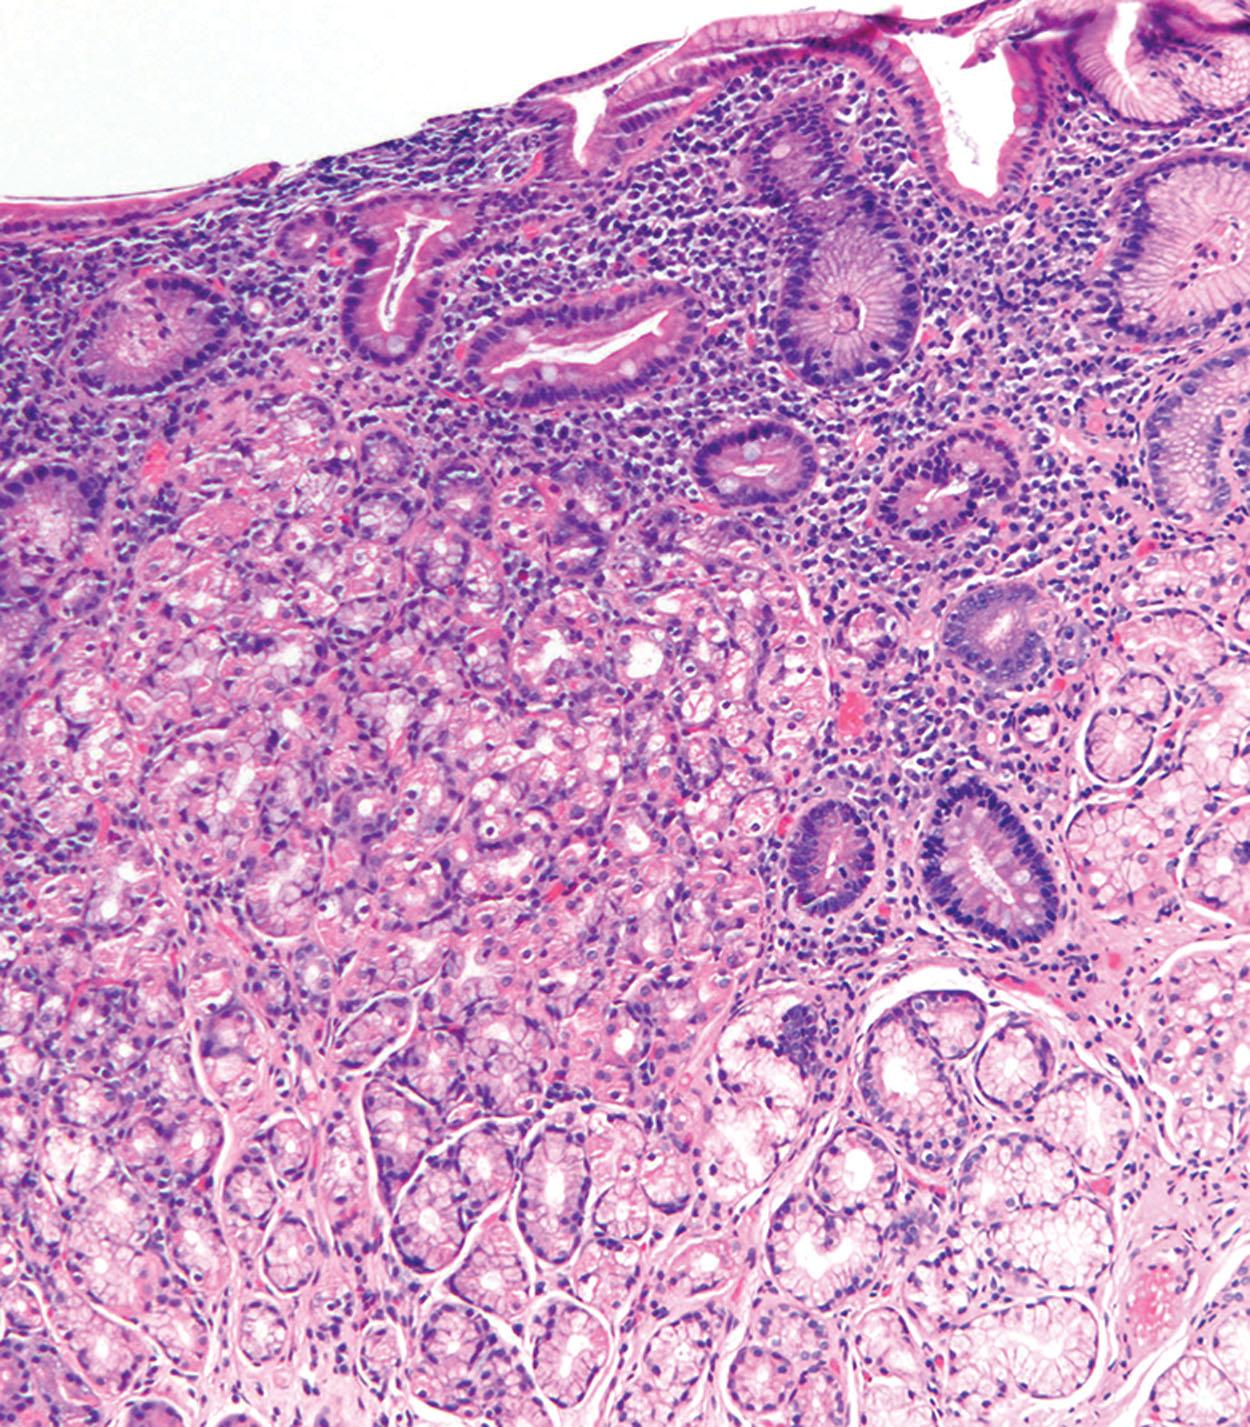 Figure 6.3, Gastric heterotopia: Tightly packed gastric oxyntic glands involving the duodenal mucosa. The surface epithelium also demonstrates gastric foveolar-type metaplasia.